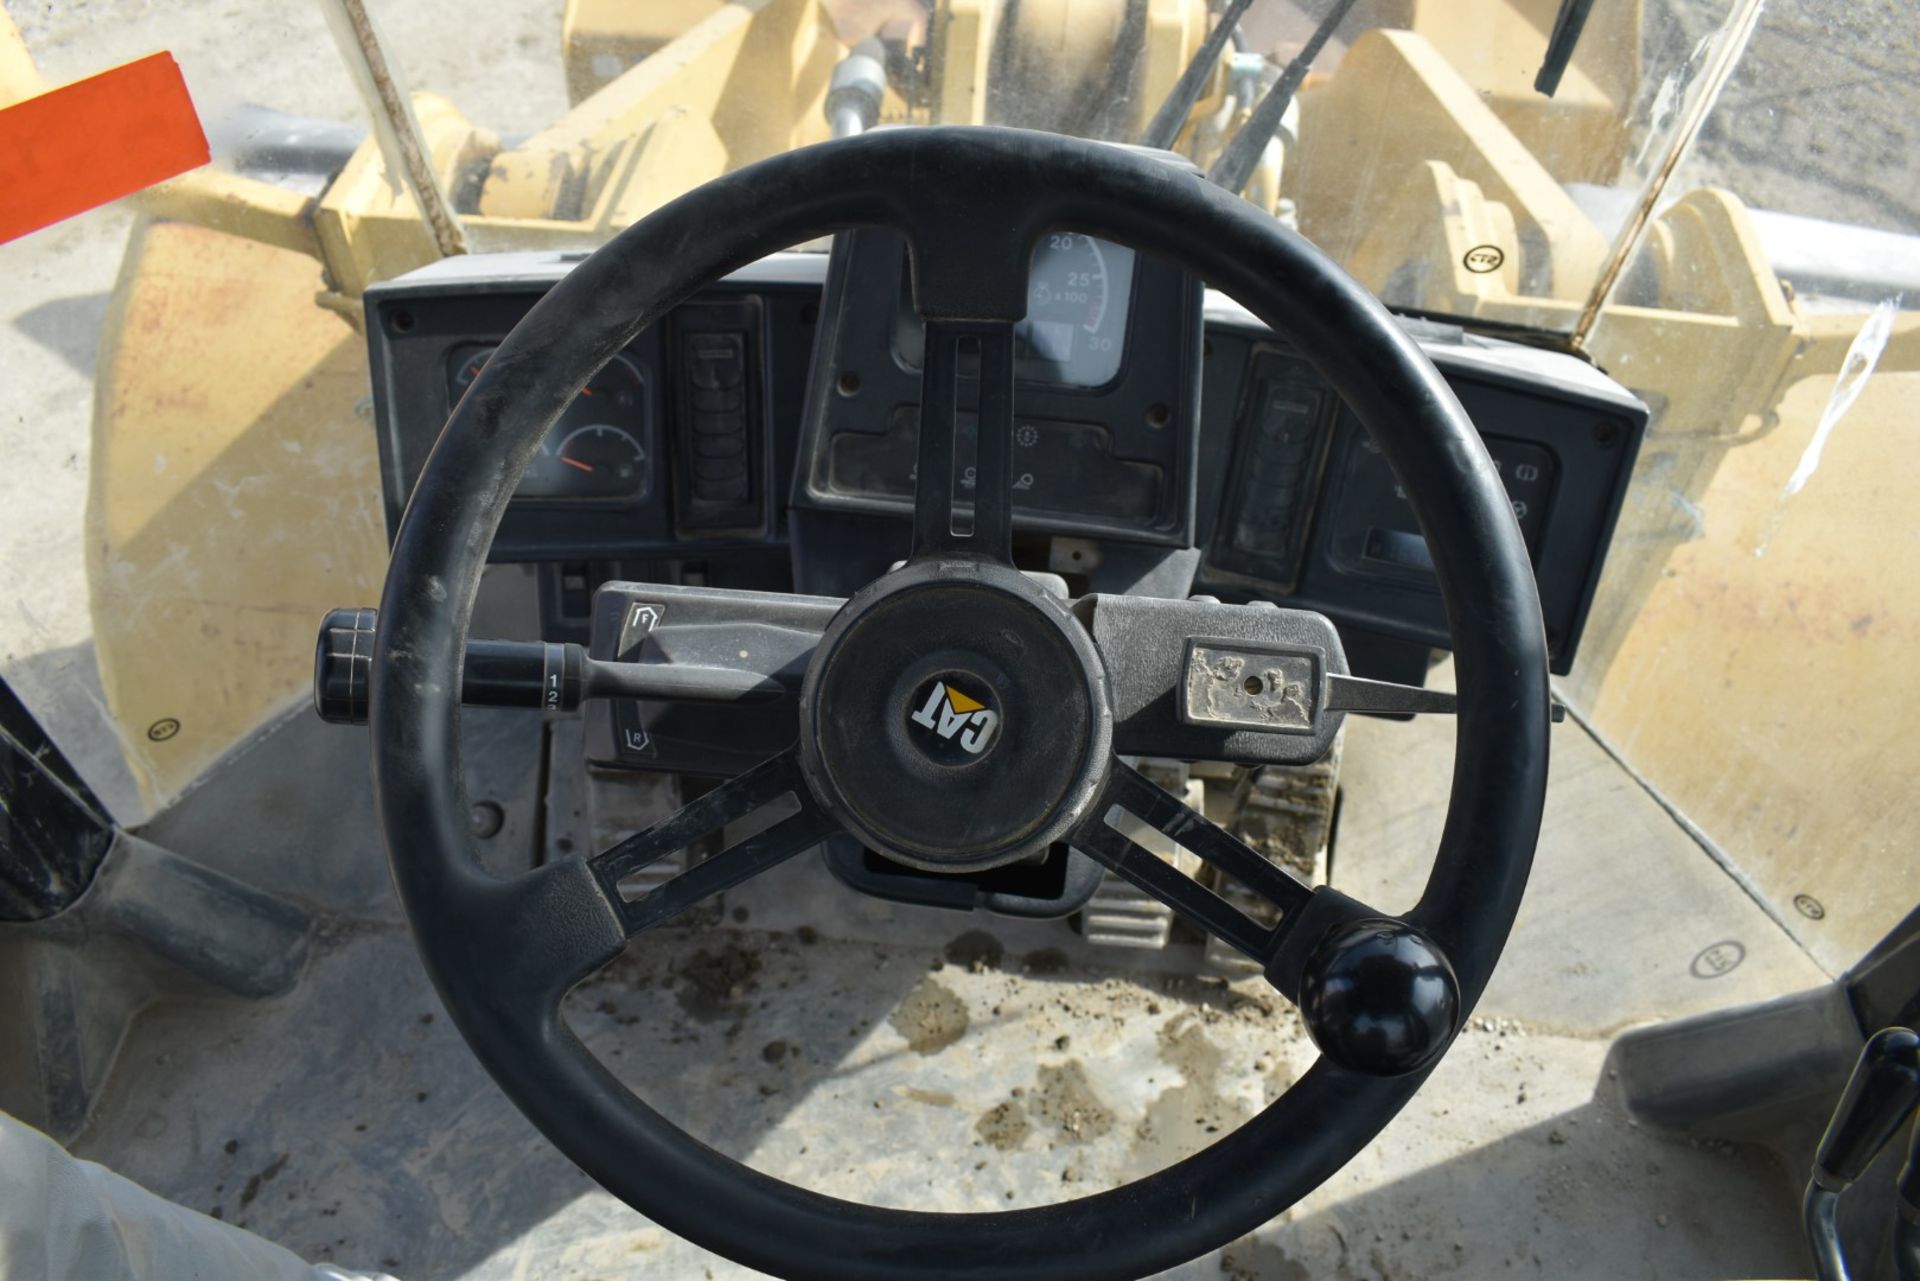 CATERPILLAR (1999) 966G ARTICULATING FRONT END WHEEL LOADER WITH BUCKET, APPROX. 16,425 HOURS ( - Image 17 of 20